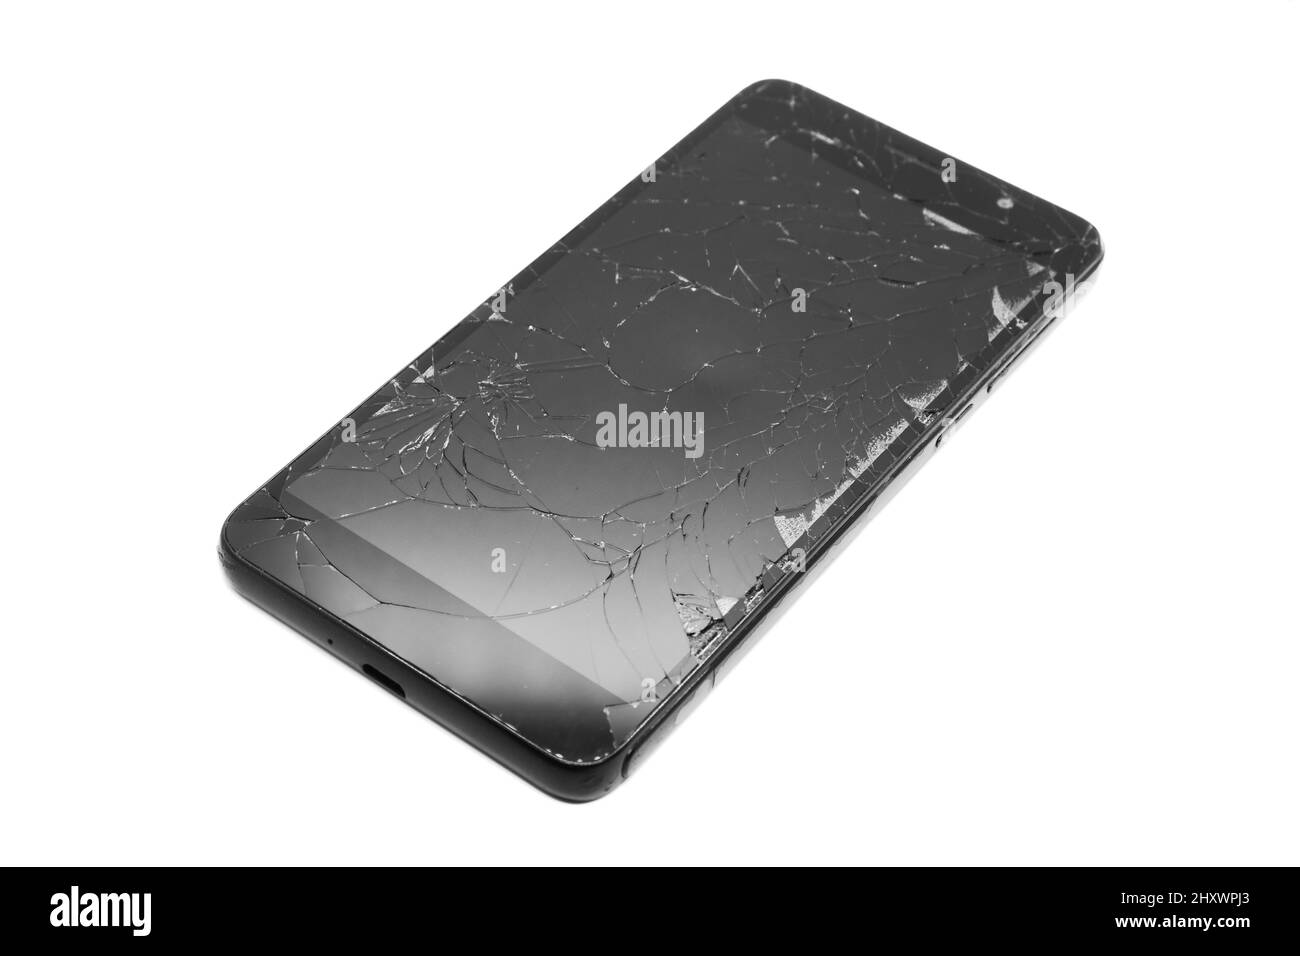 Broken display on a black smartphone isolate on a white background. Smartphone repair. Smartphone display replacement. Stock Photo